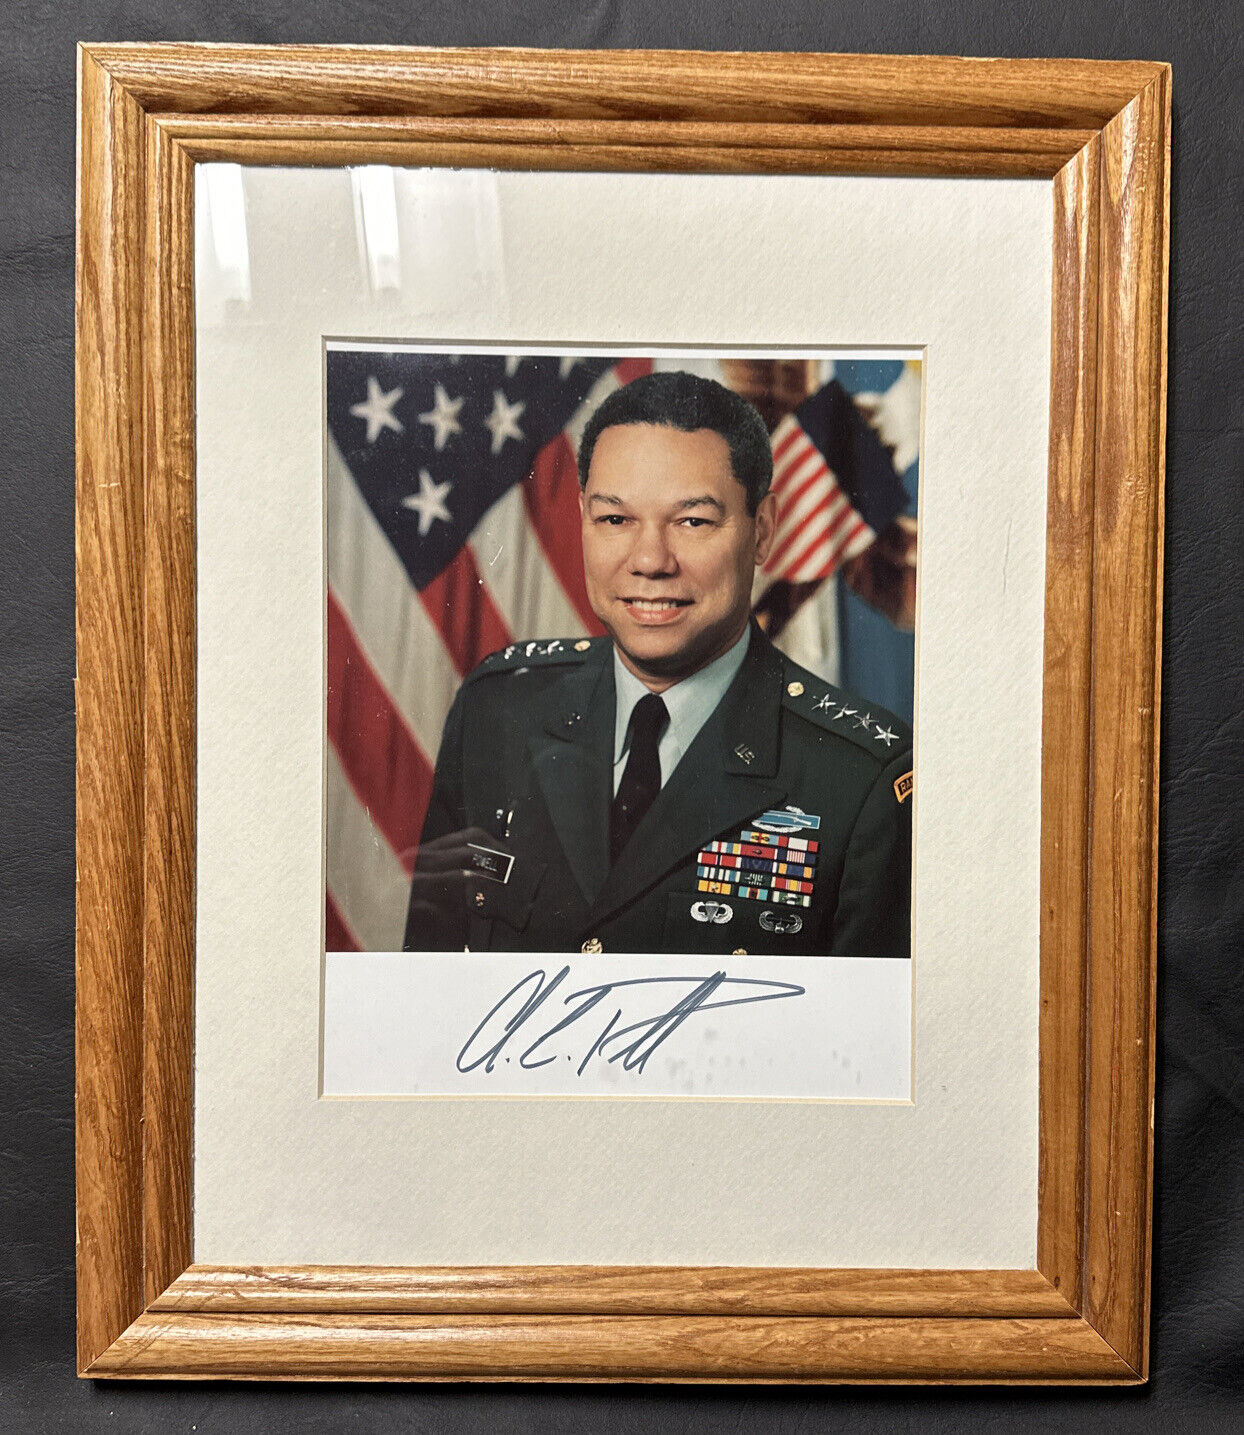 General Colin Powell Autographed 8X10 Matted & Framed Photograph (Near Mint)